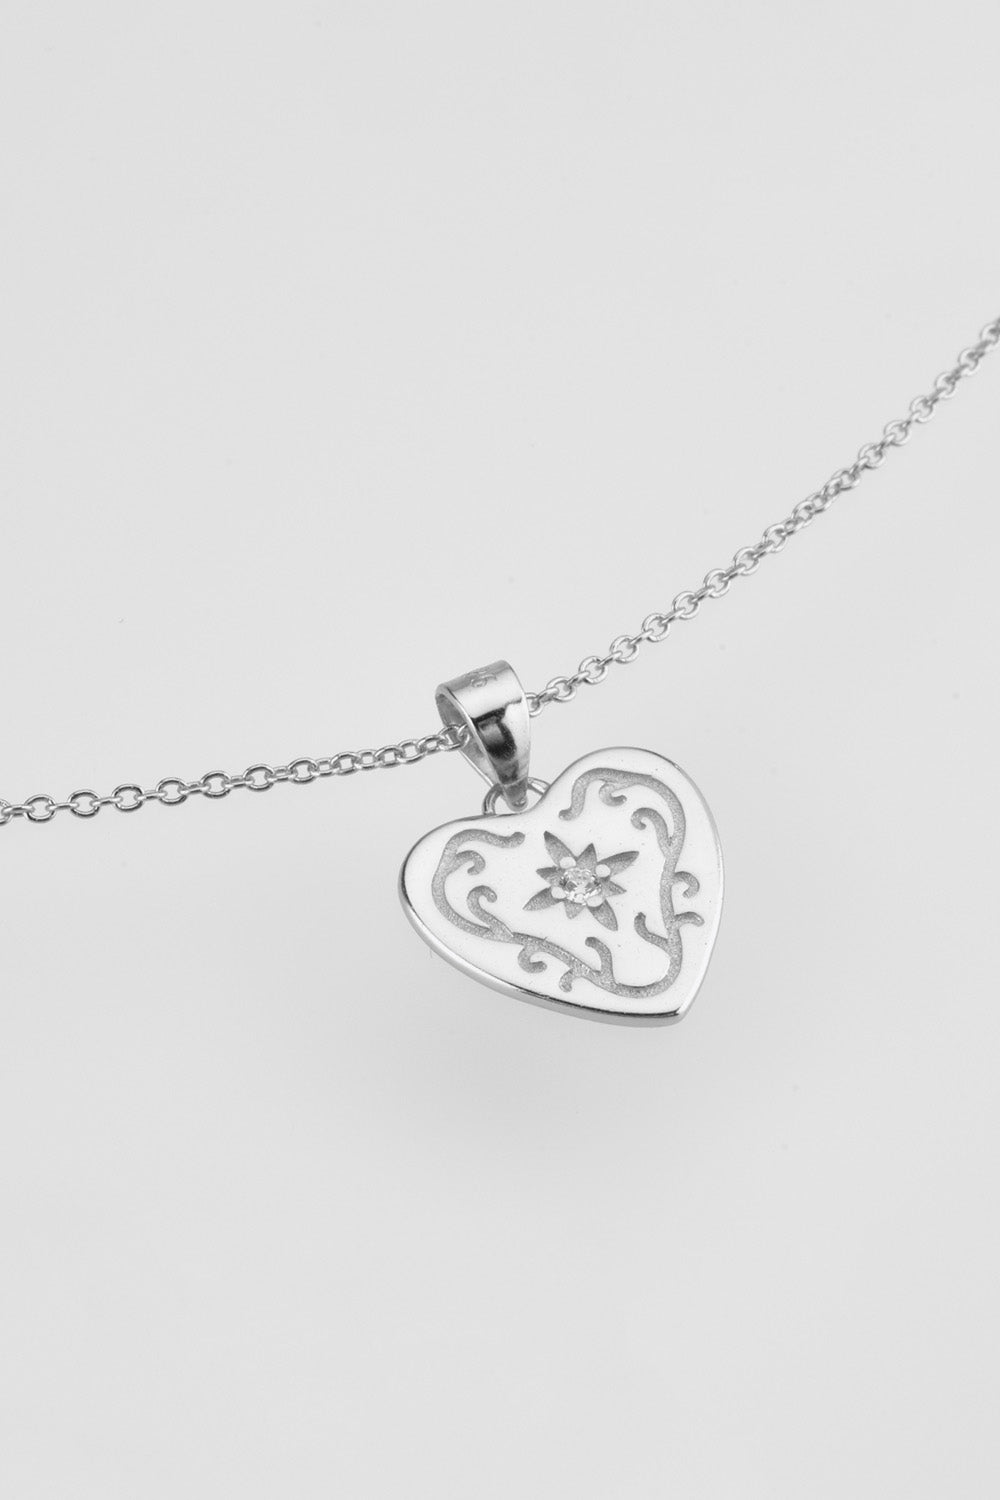 Heart Pendant 925 Sterling Silver Necklace - Guy Christopher